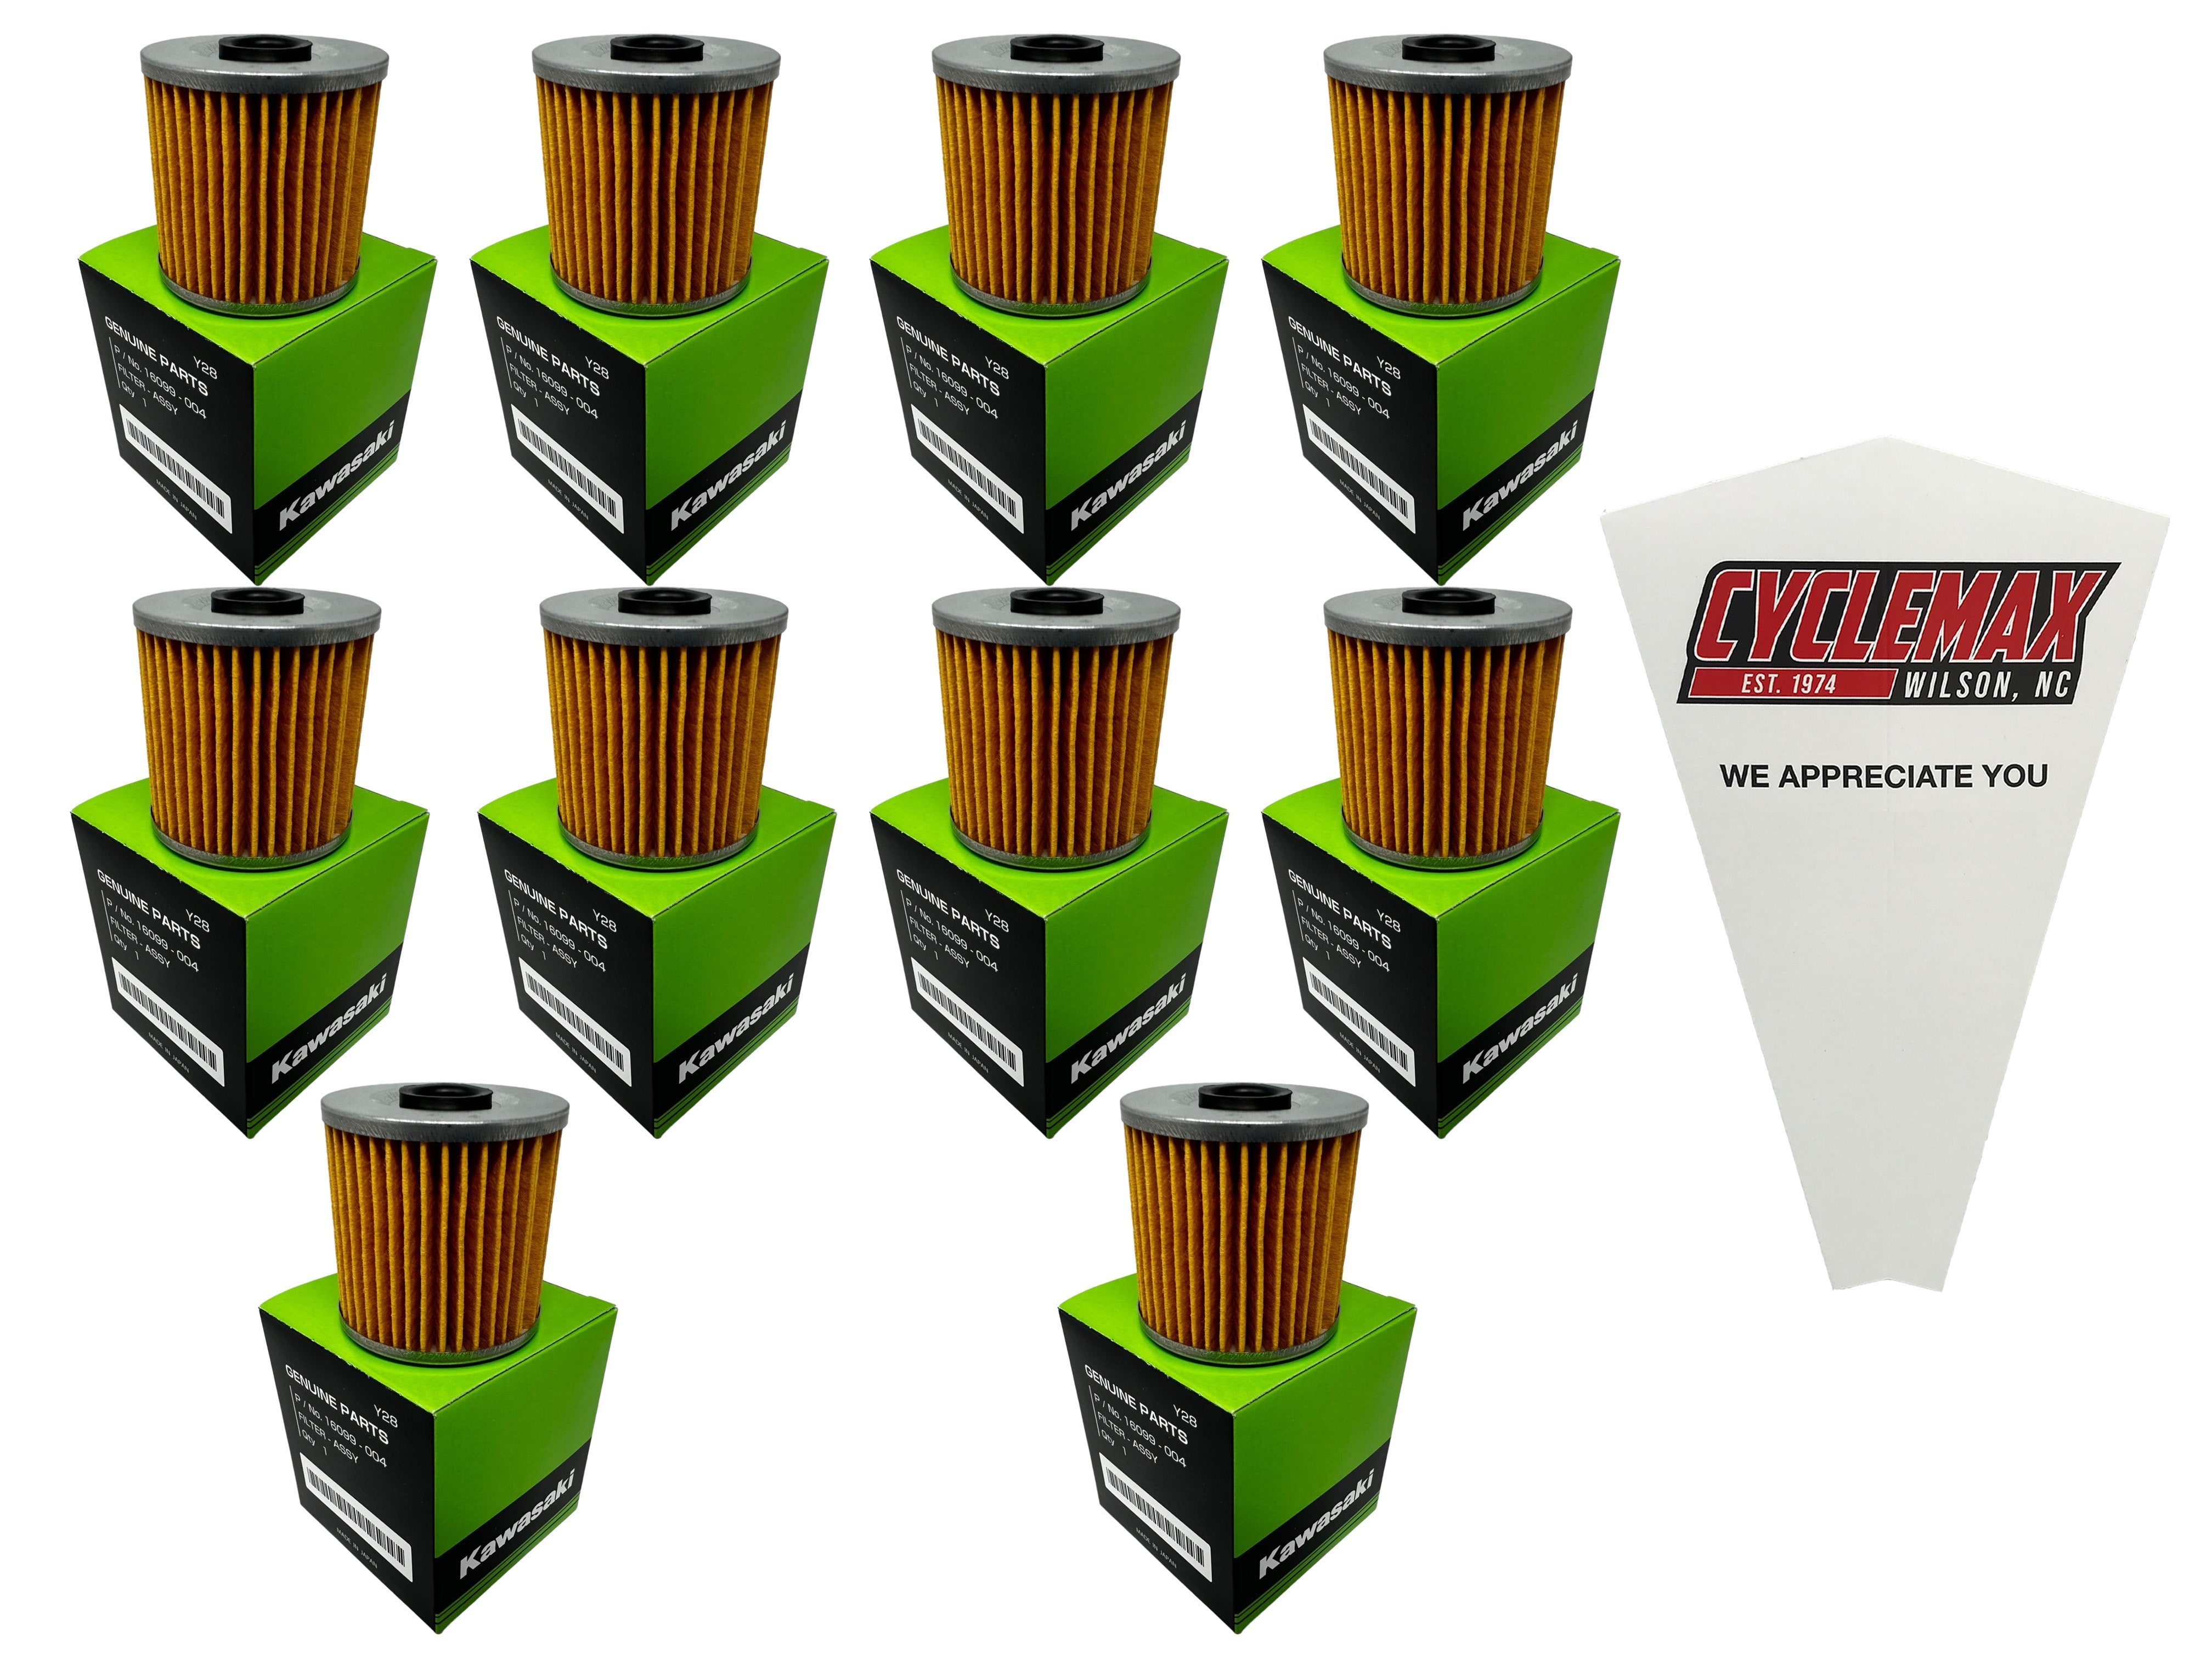 Cyclemax Ten Pack for Kawasaki Oil Filter 16099-004 Contains Ten Filters and a Funnel